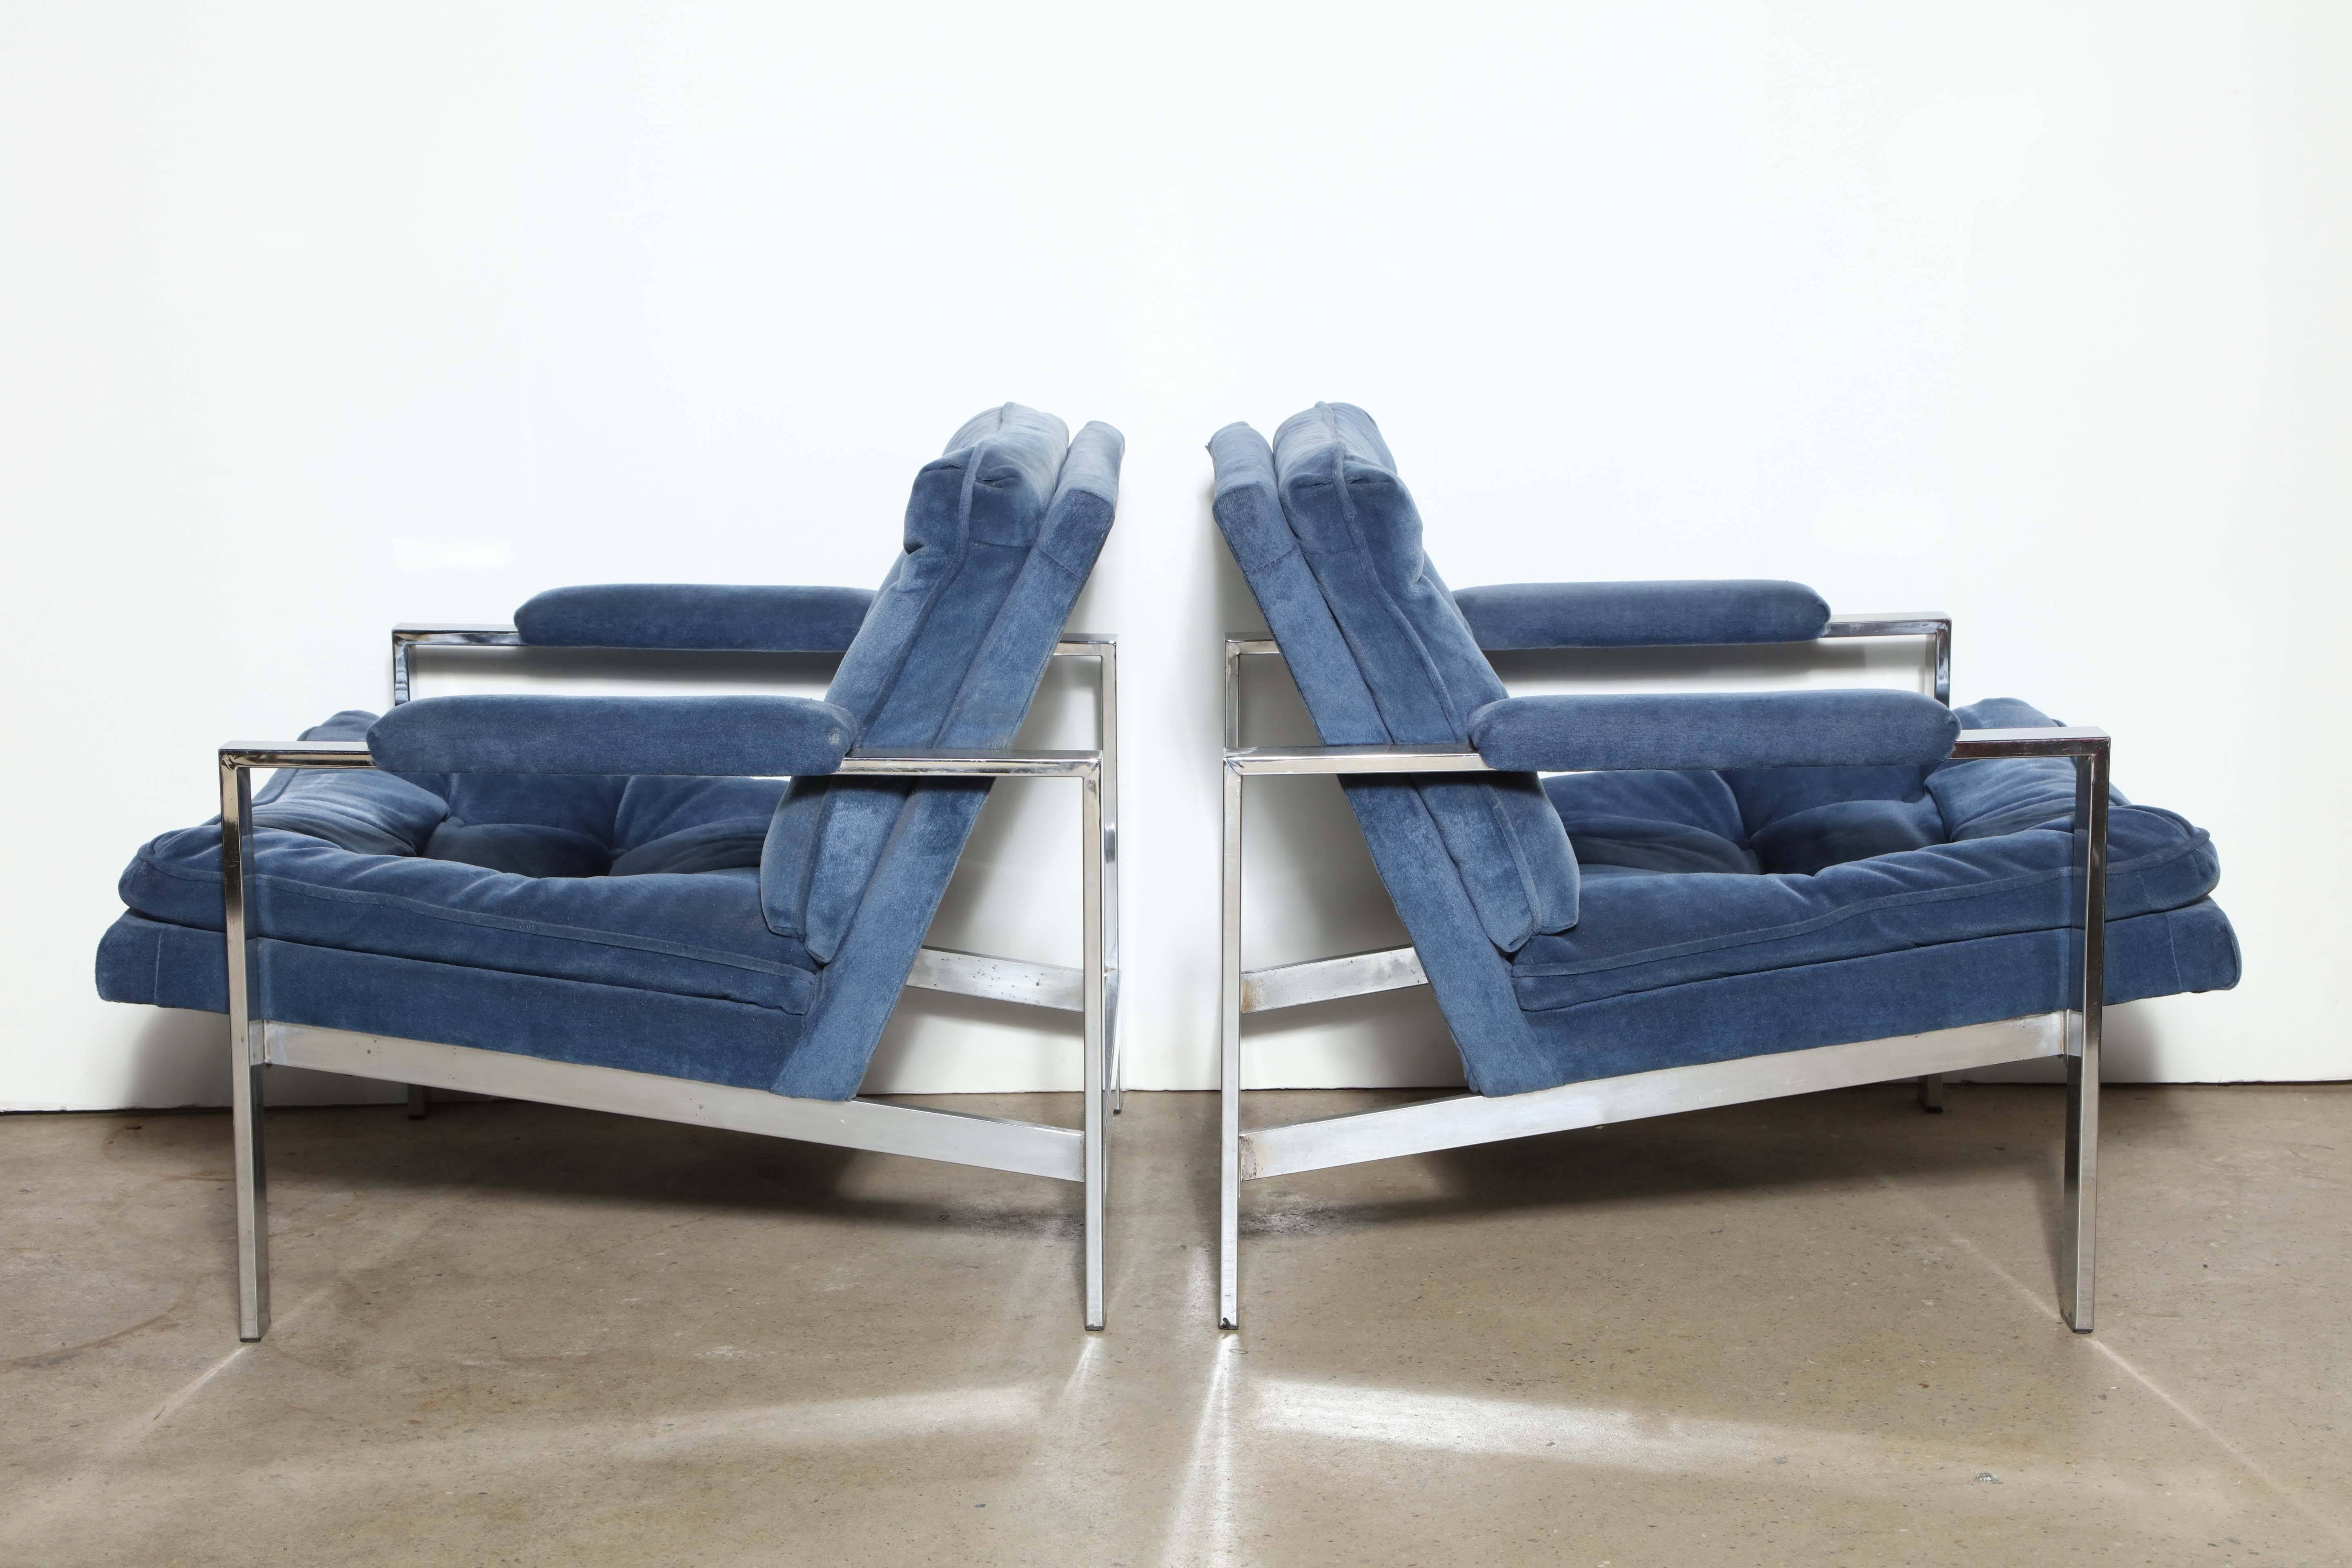 Circa 1970 Modern Pair of Cy Mann Chrome and Fabric Armchairs.  Featuring wide, slant back design with solid Chrome construction and tufted French Blue Velvet upholstery.  Comfortable.  Milo Baughman style.  Supreme Italian production quality. 